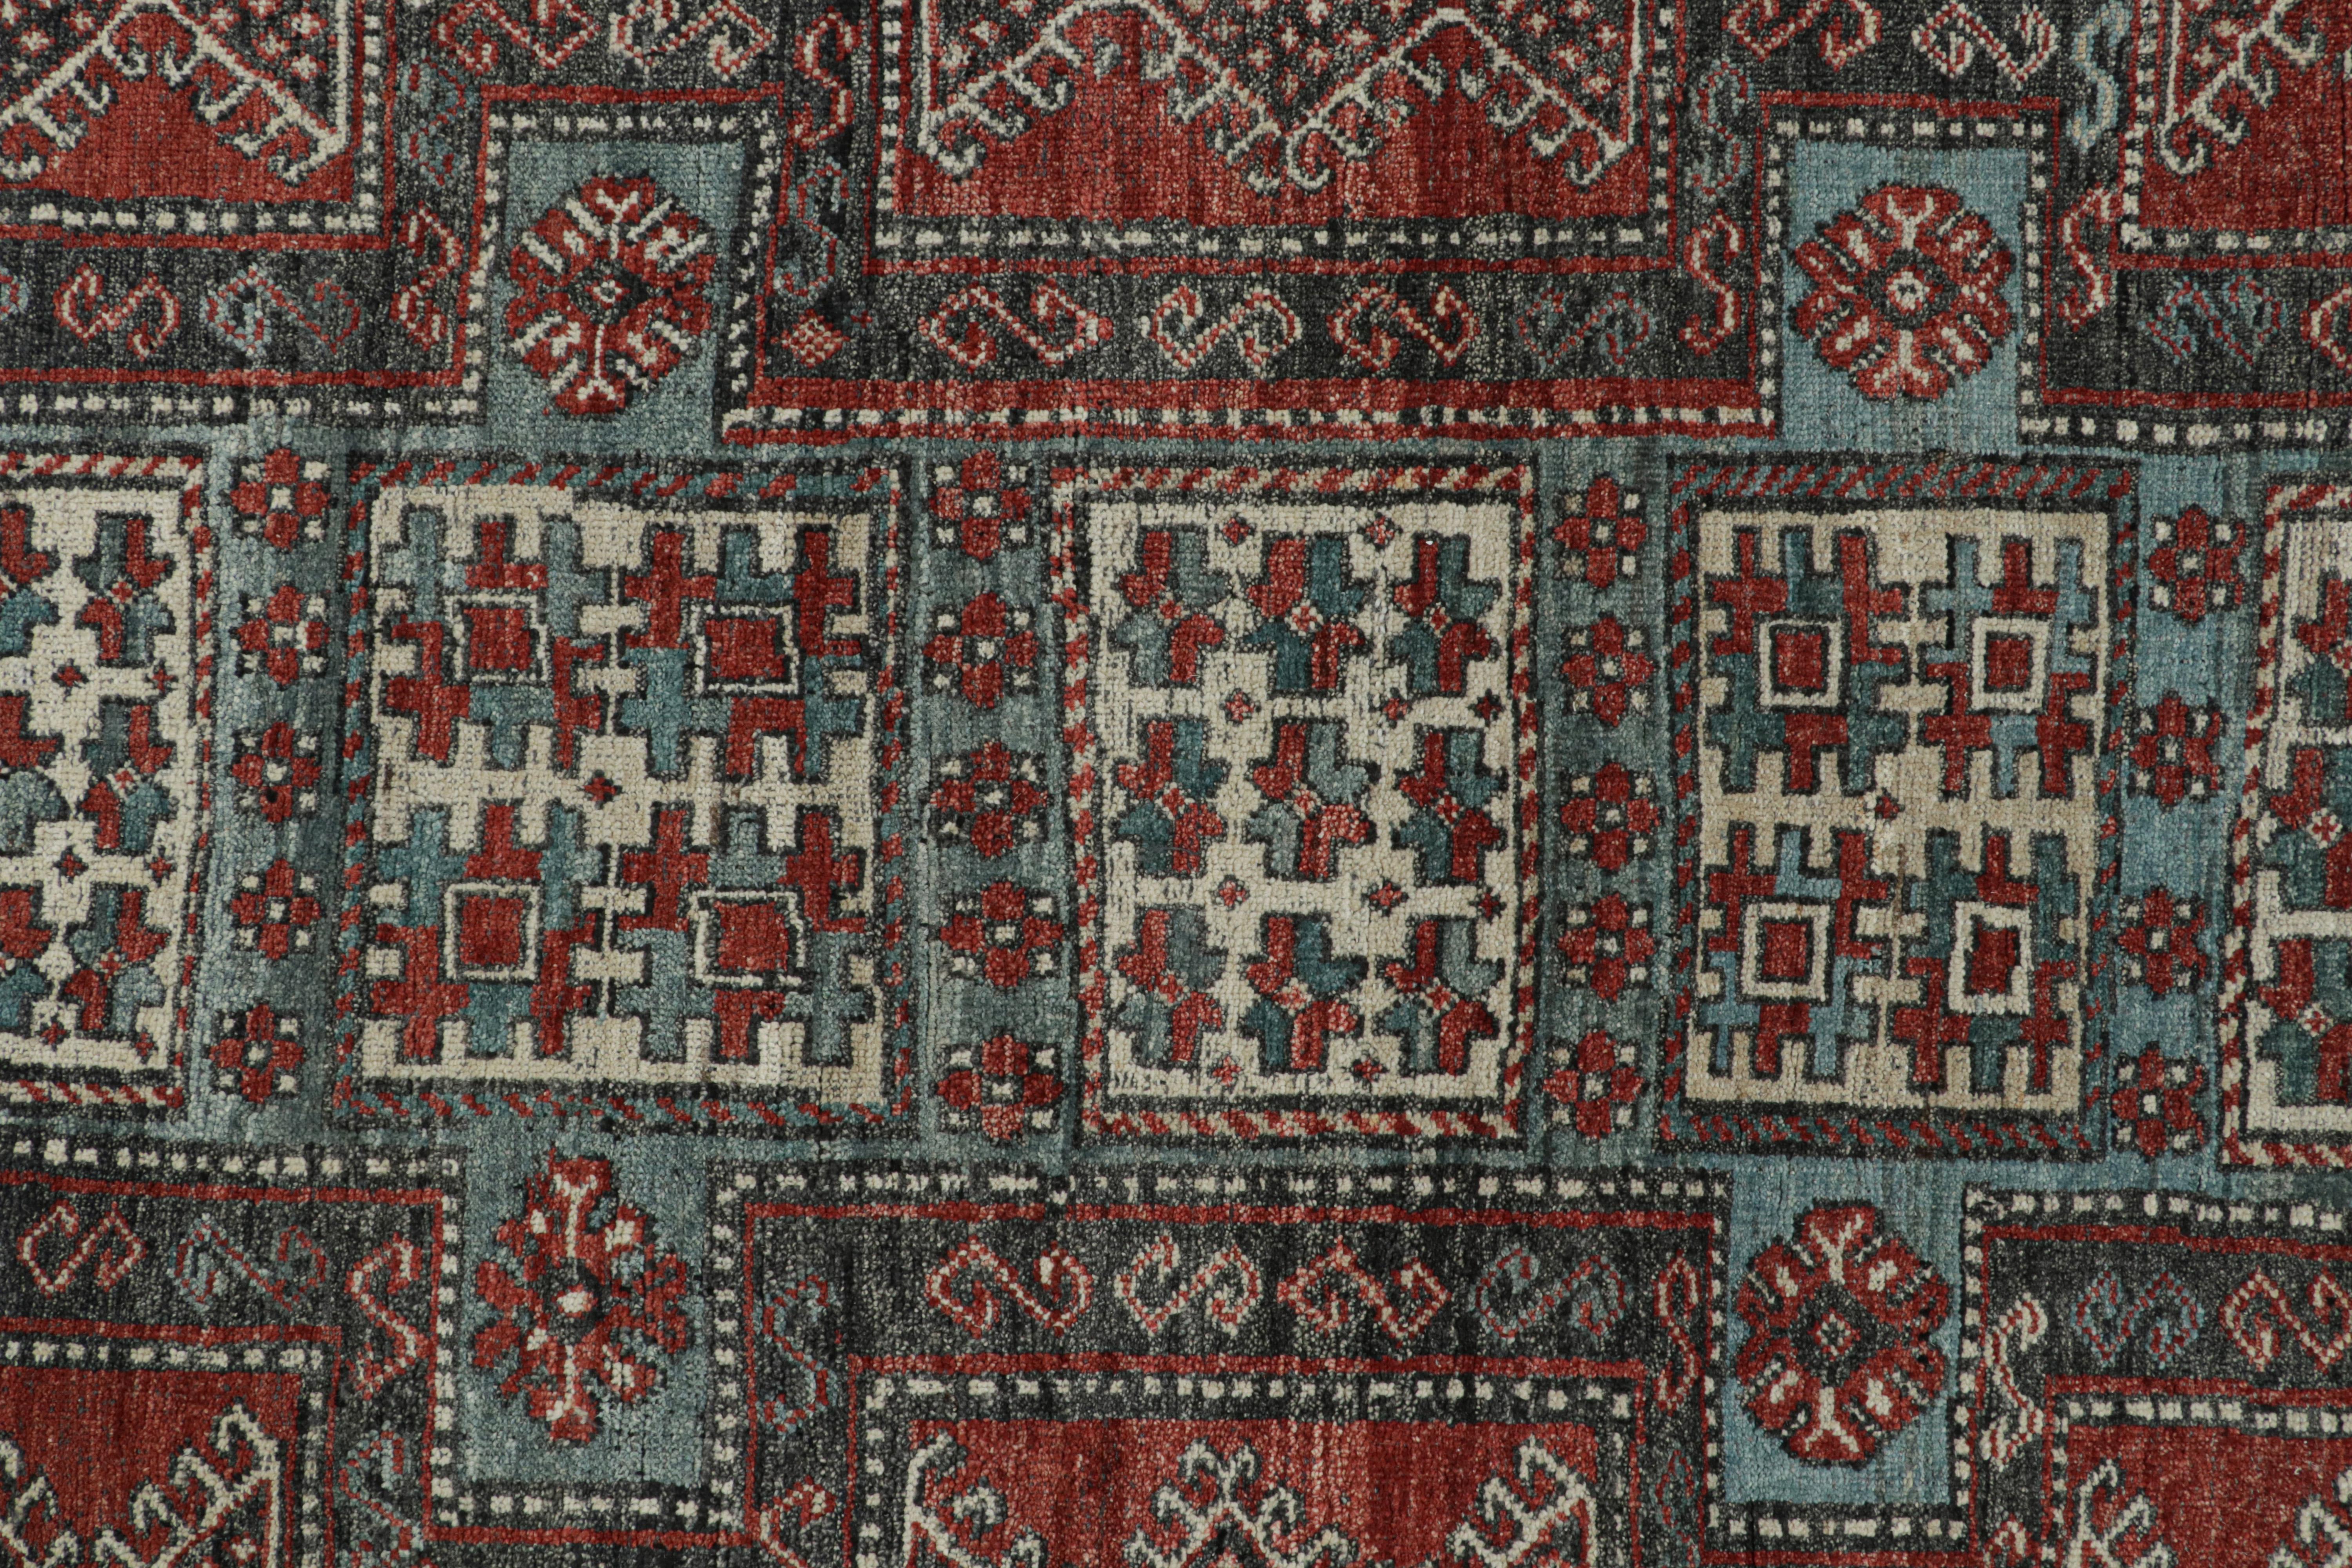 Contemporary Rug & Kilim’s Tribal Style Rug in Red, Blue & Black Geometric Patterns For Sale